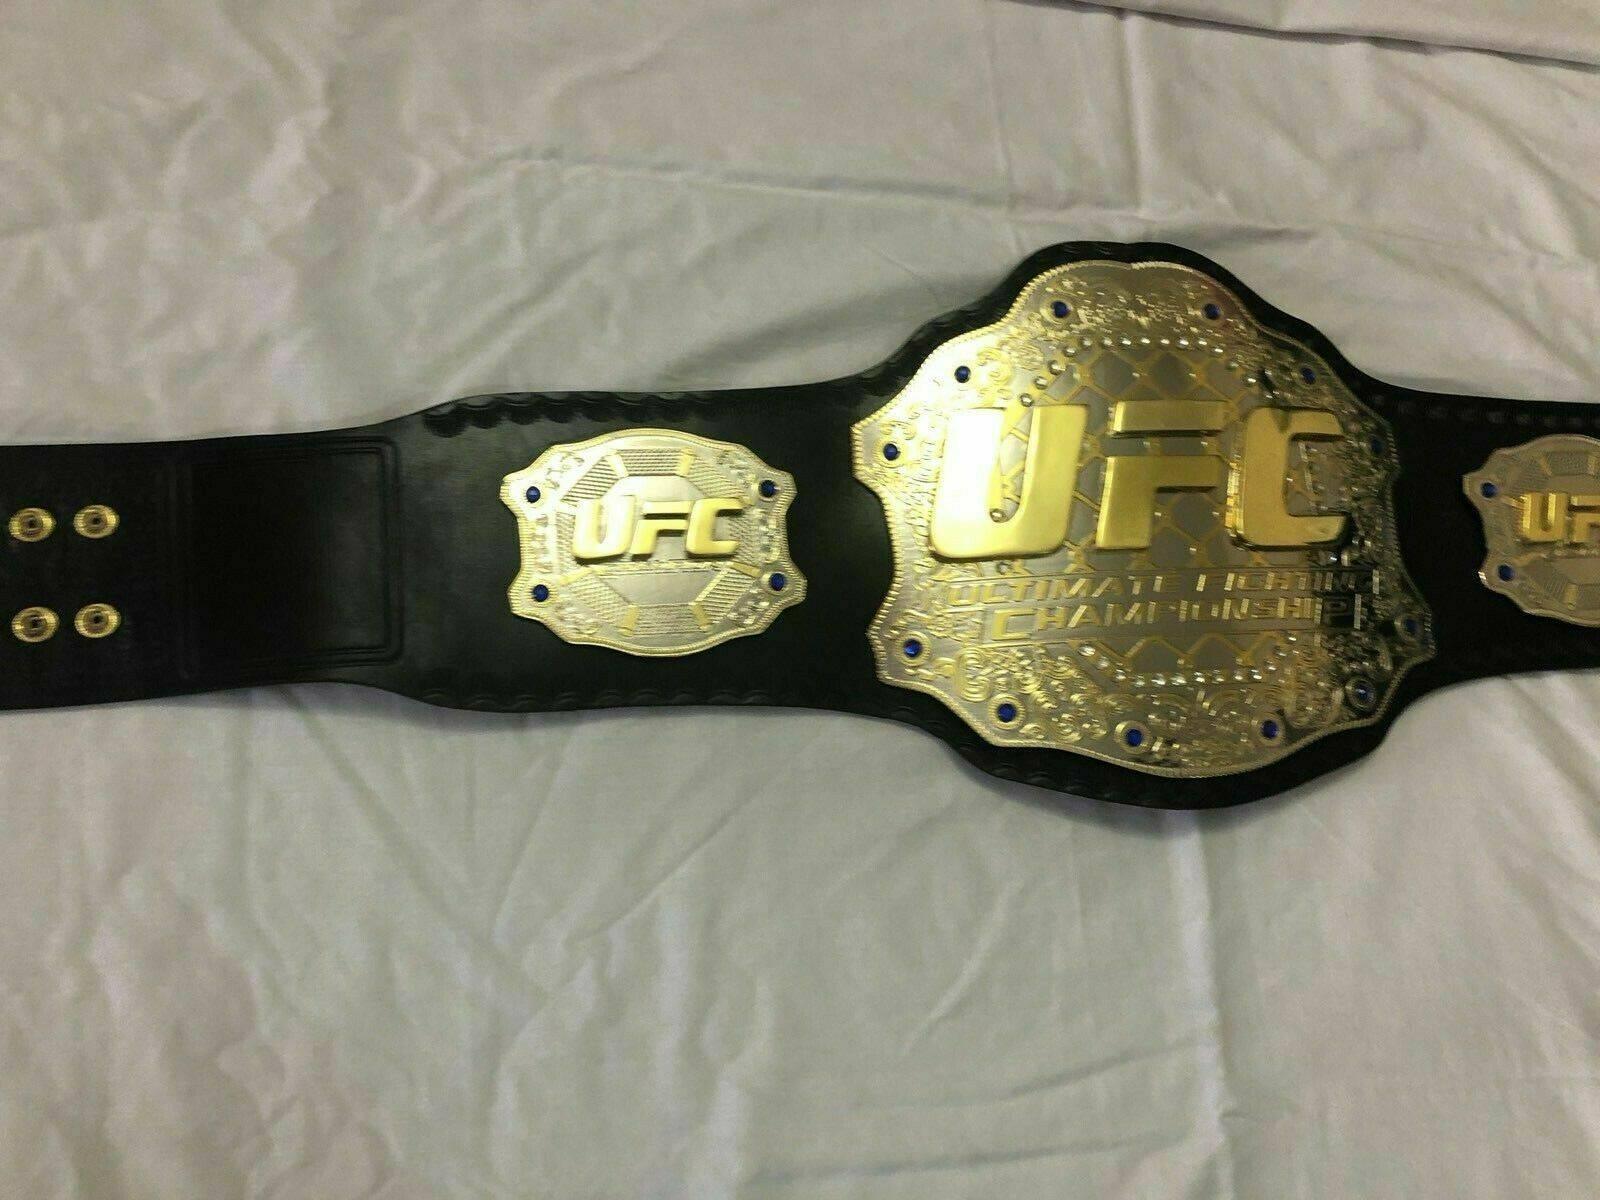 UFC Brass Double Stacked Championship Belt